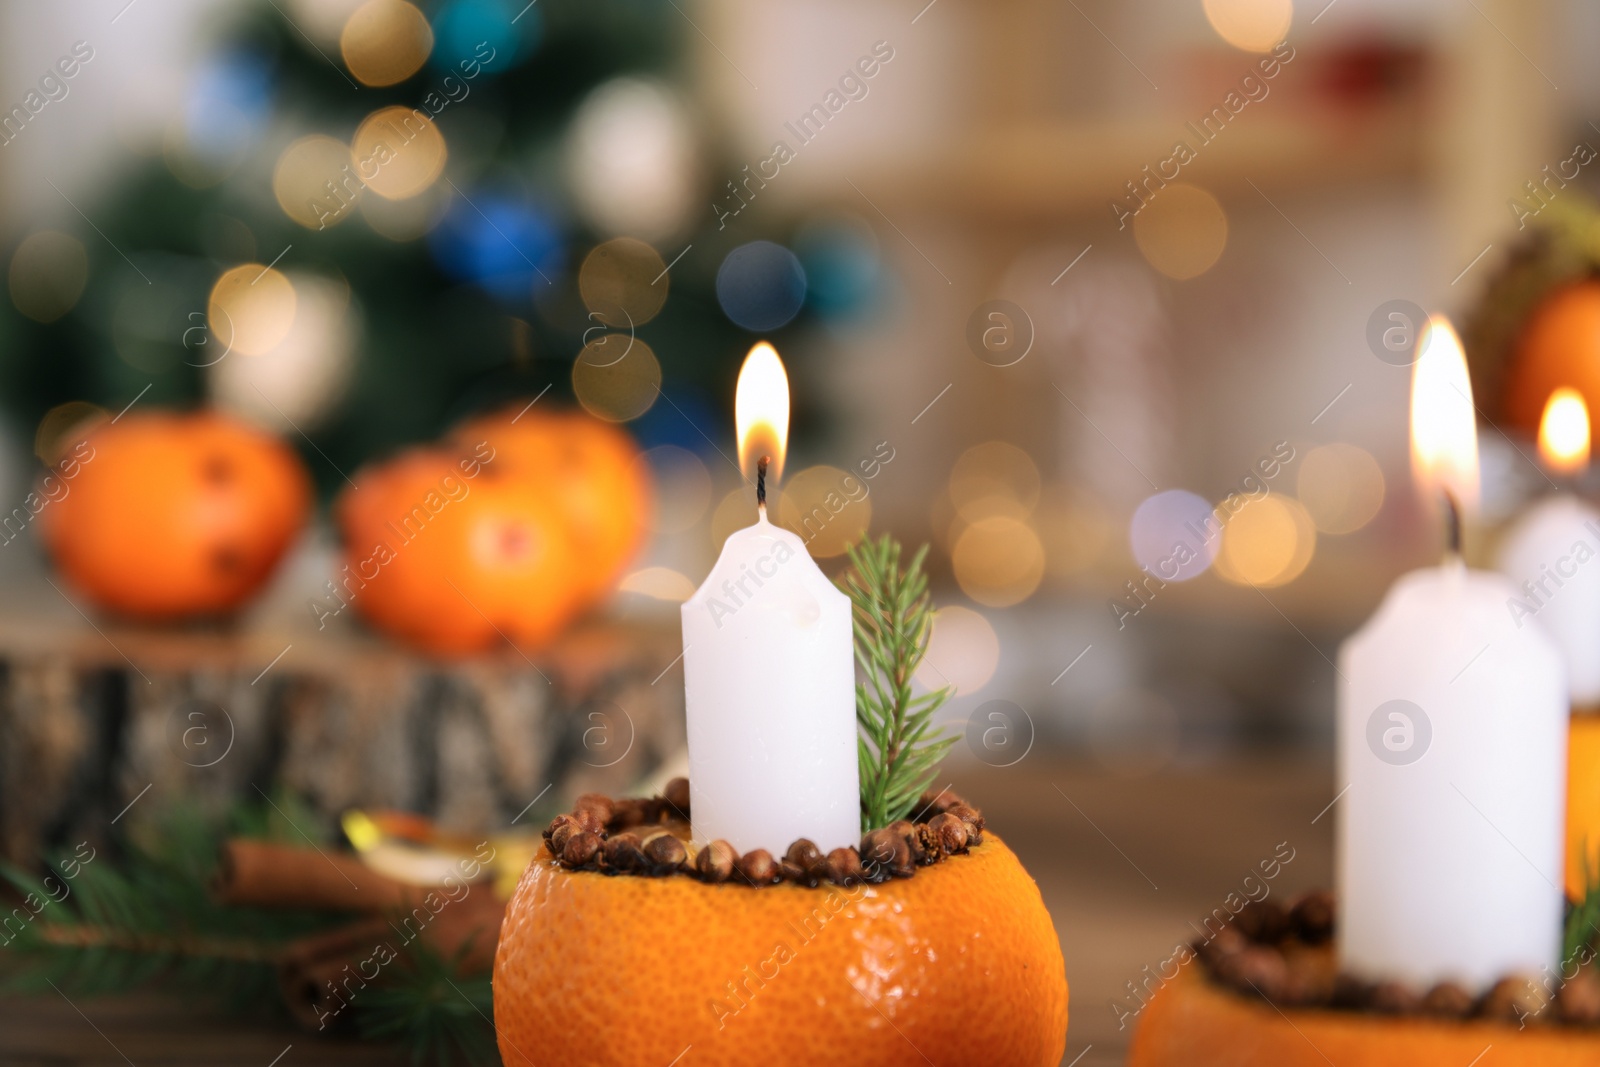 Photo of Burning candle in tangerine peel as holder against blurred background, closeup